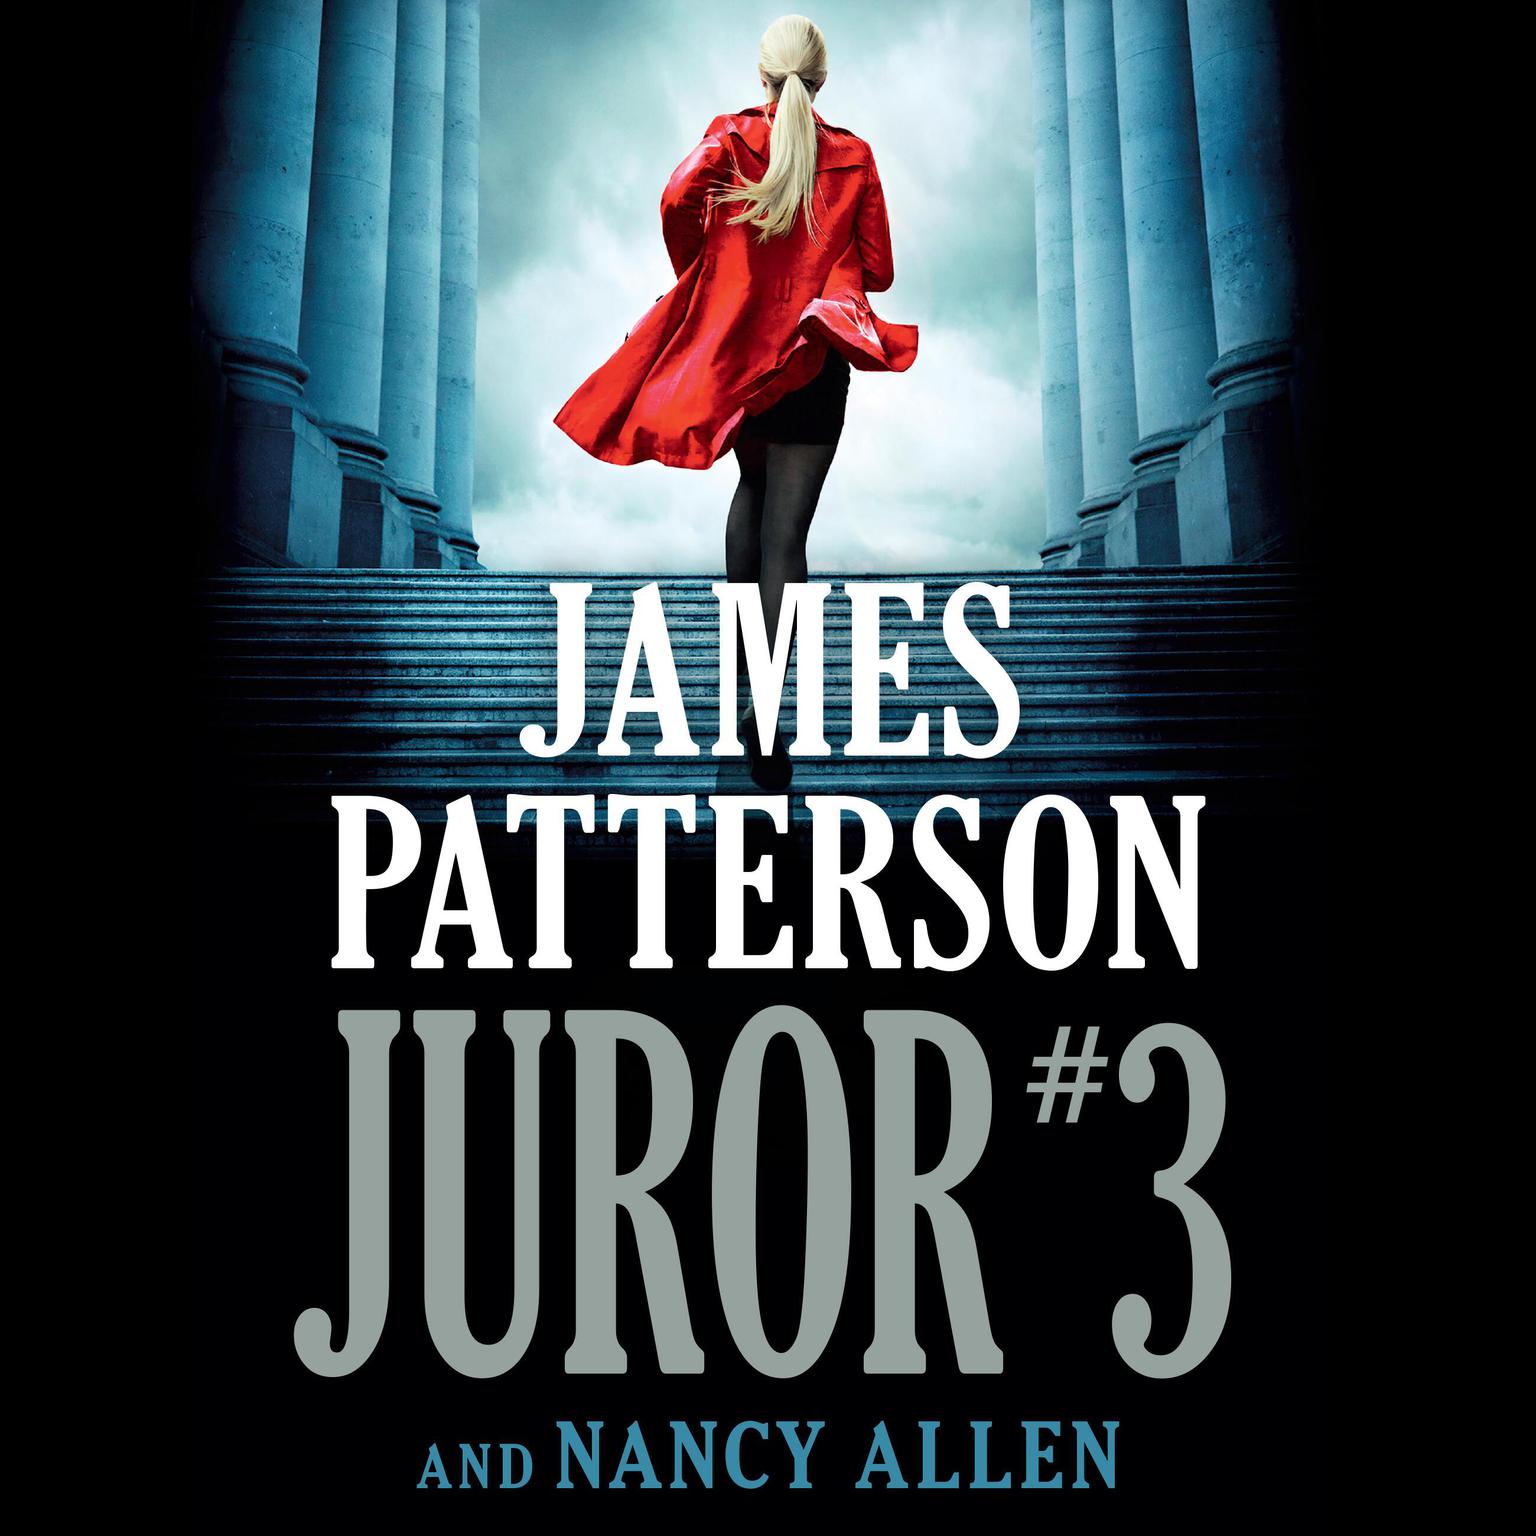 Juror #3 Audiobook, by James Patterson